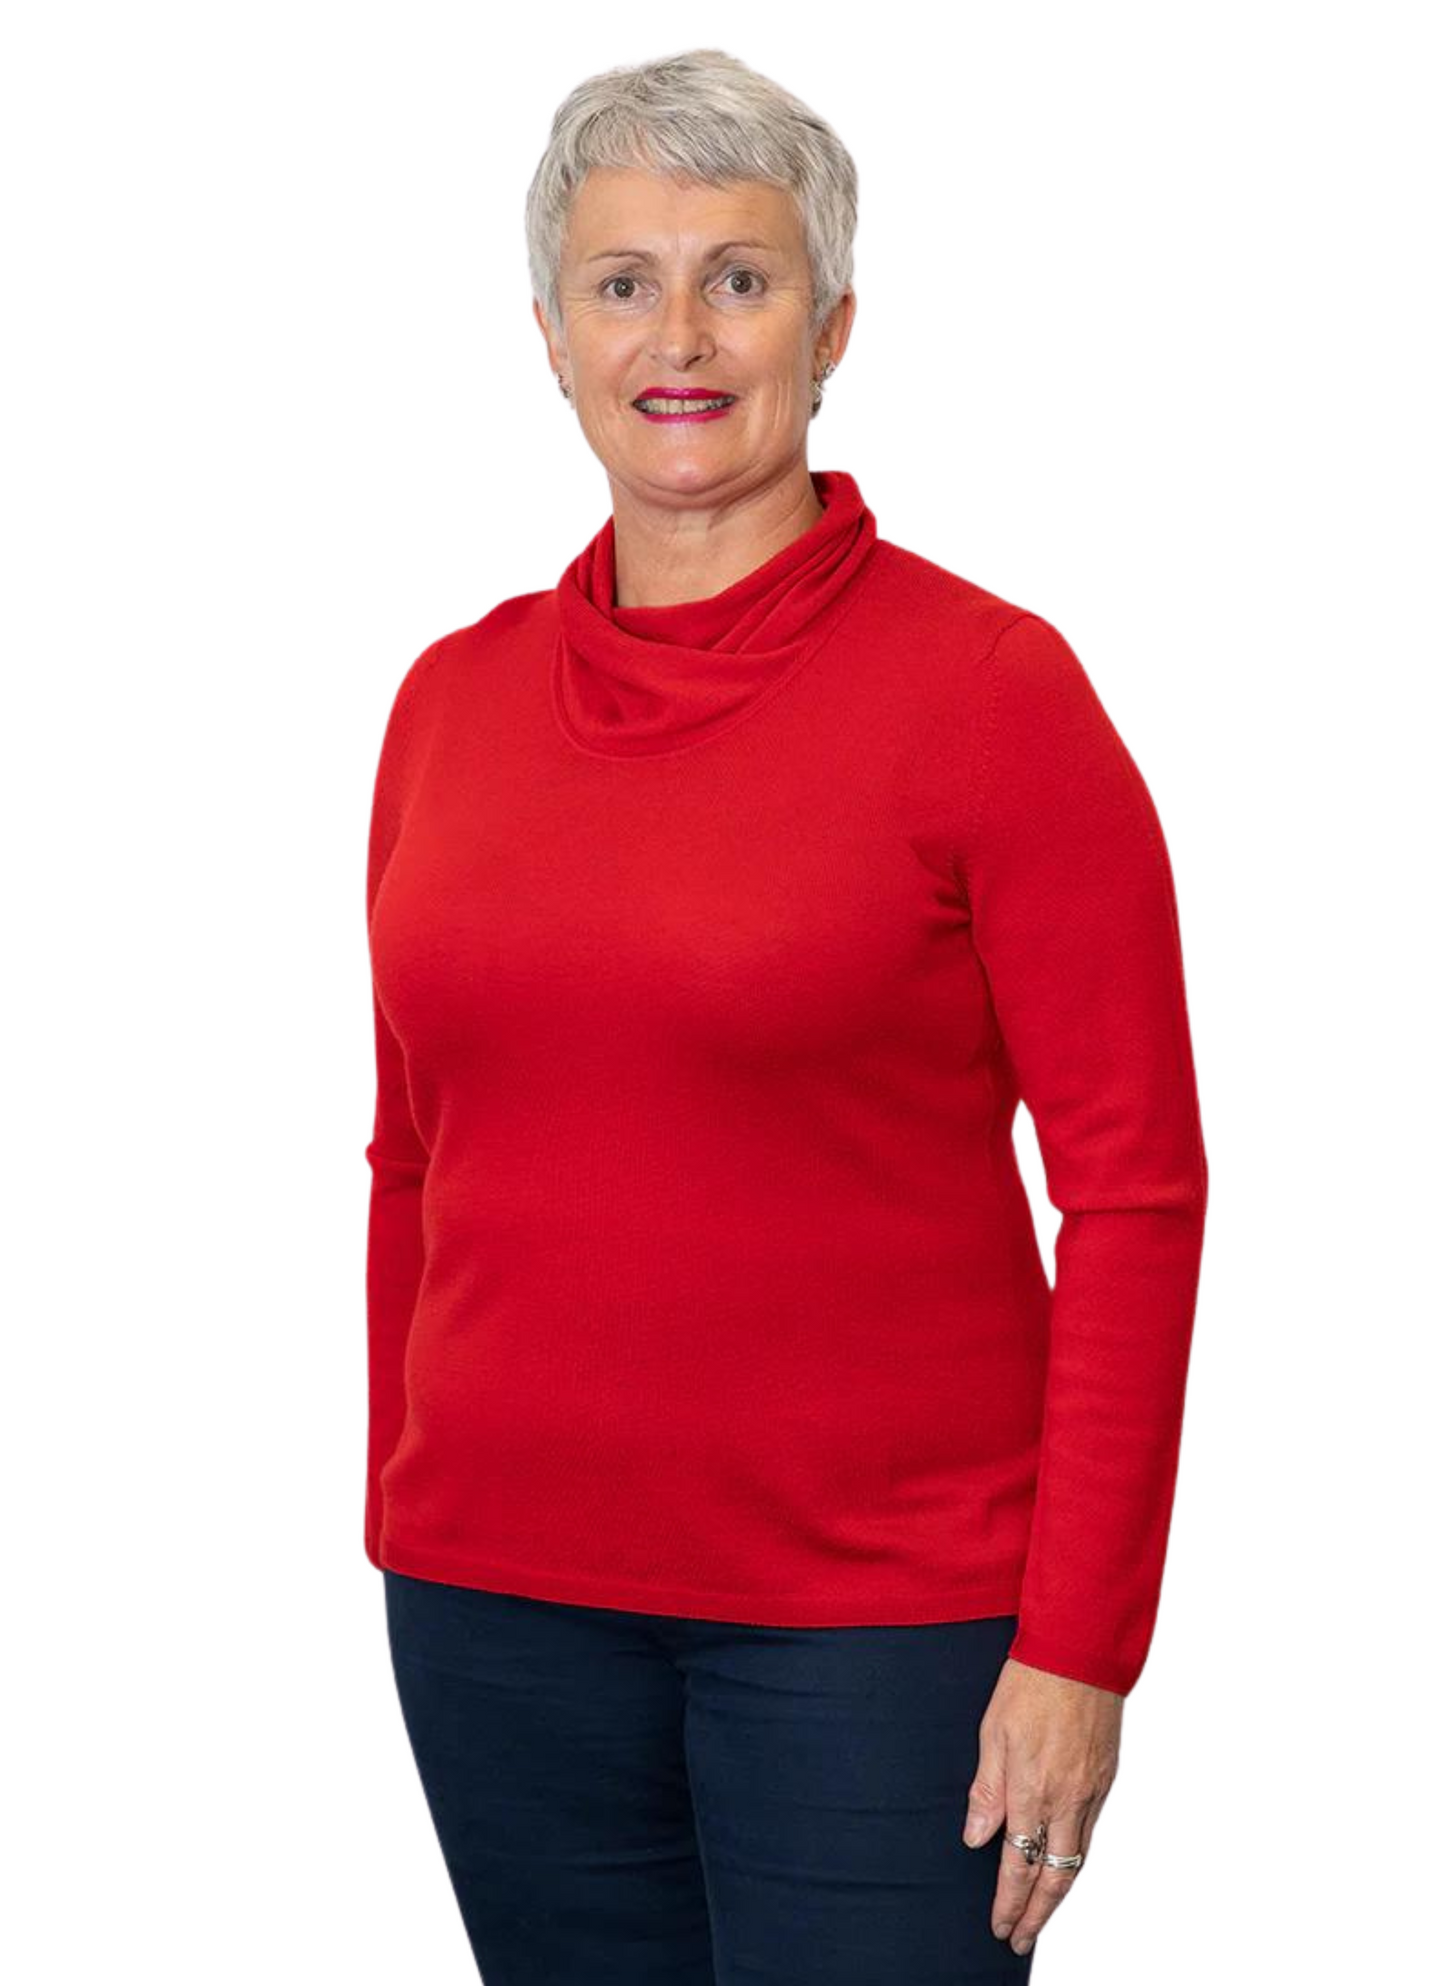 Supersoft Merino Wrap Neck Jumper from AOK Clothing